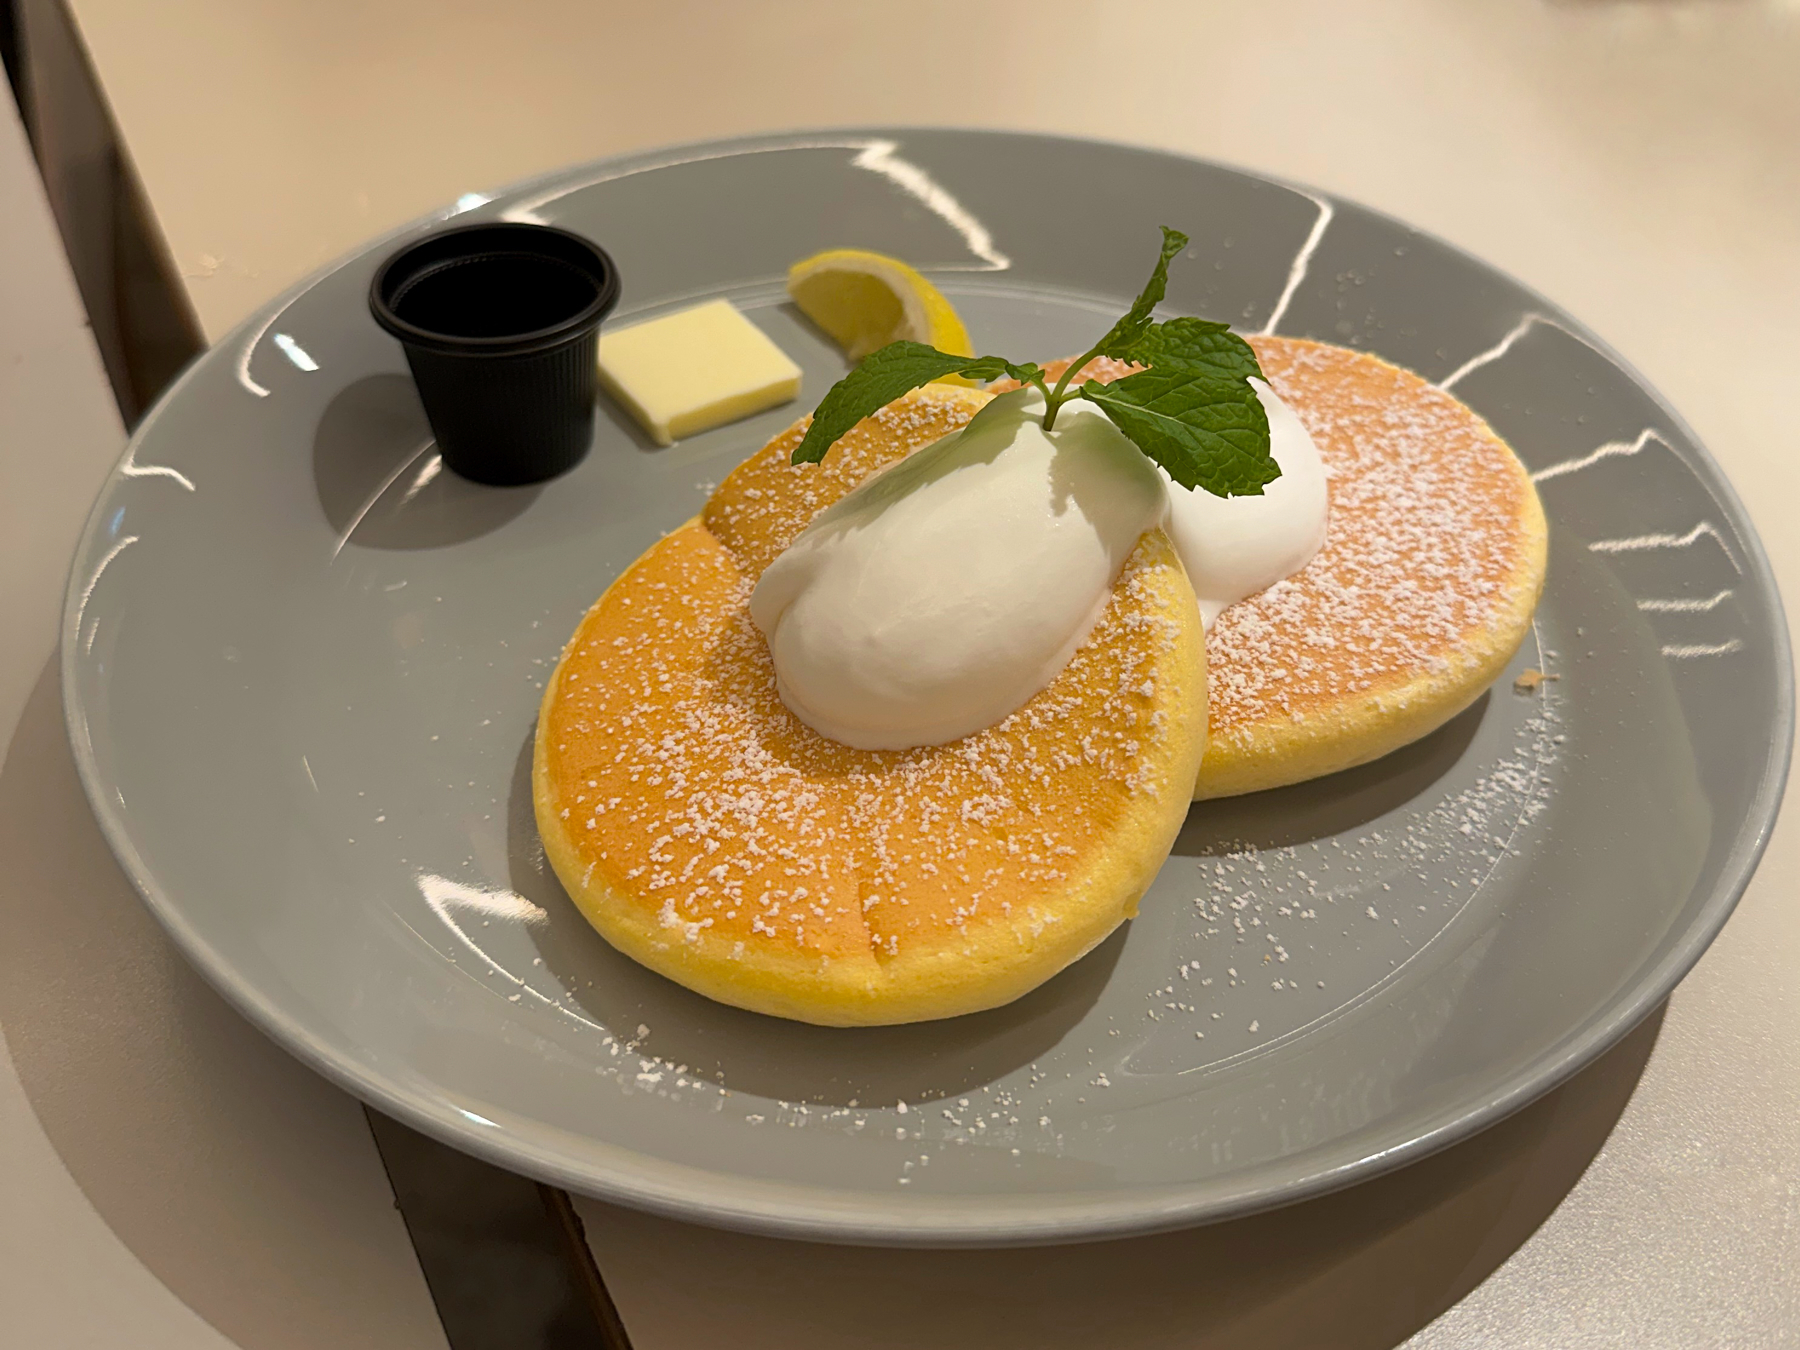 Two fluffy pancakes topped with a dollop of whipped cream, served with a slice of lemon, a pat of butter, and a small container of syrup, sprinkled with powdered sugar and garnished with a mint leaf, presented on a gray plate.